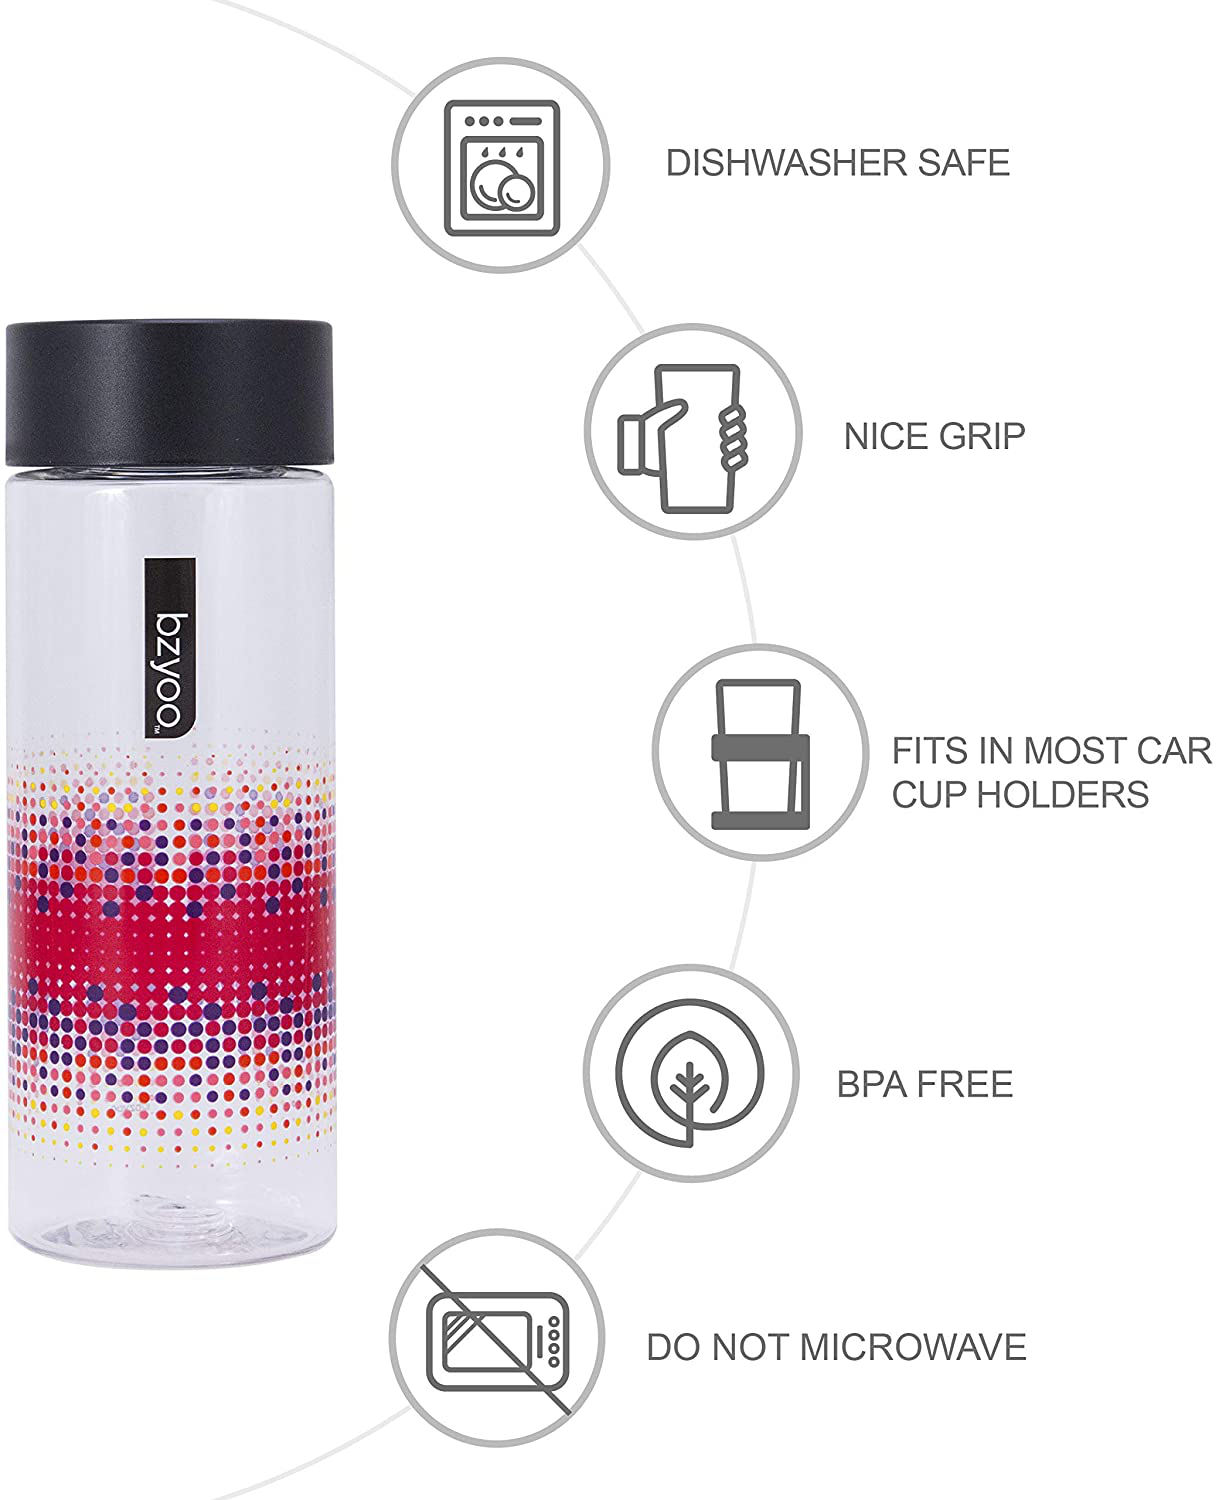 bzyoo Para 19oz BPA-Free Dishwasher Safe Reusable Sports Cups Drinking Durable Plastic Tumblers Water Bottle with Leak Proof Design for Outdoor Activity Hike Camping Cycling Wellness (Warm- Dot)